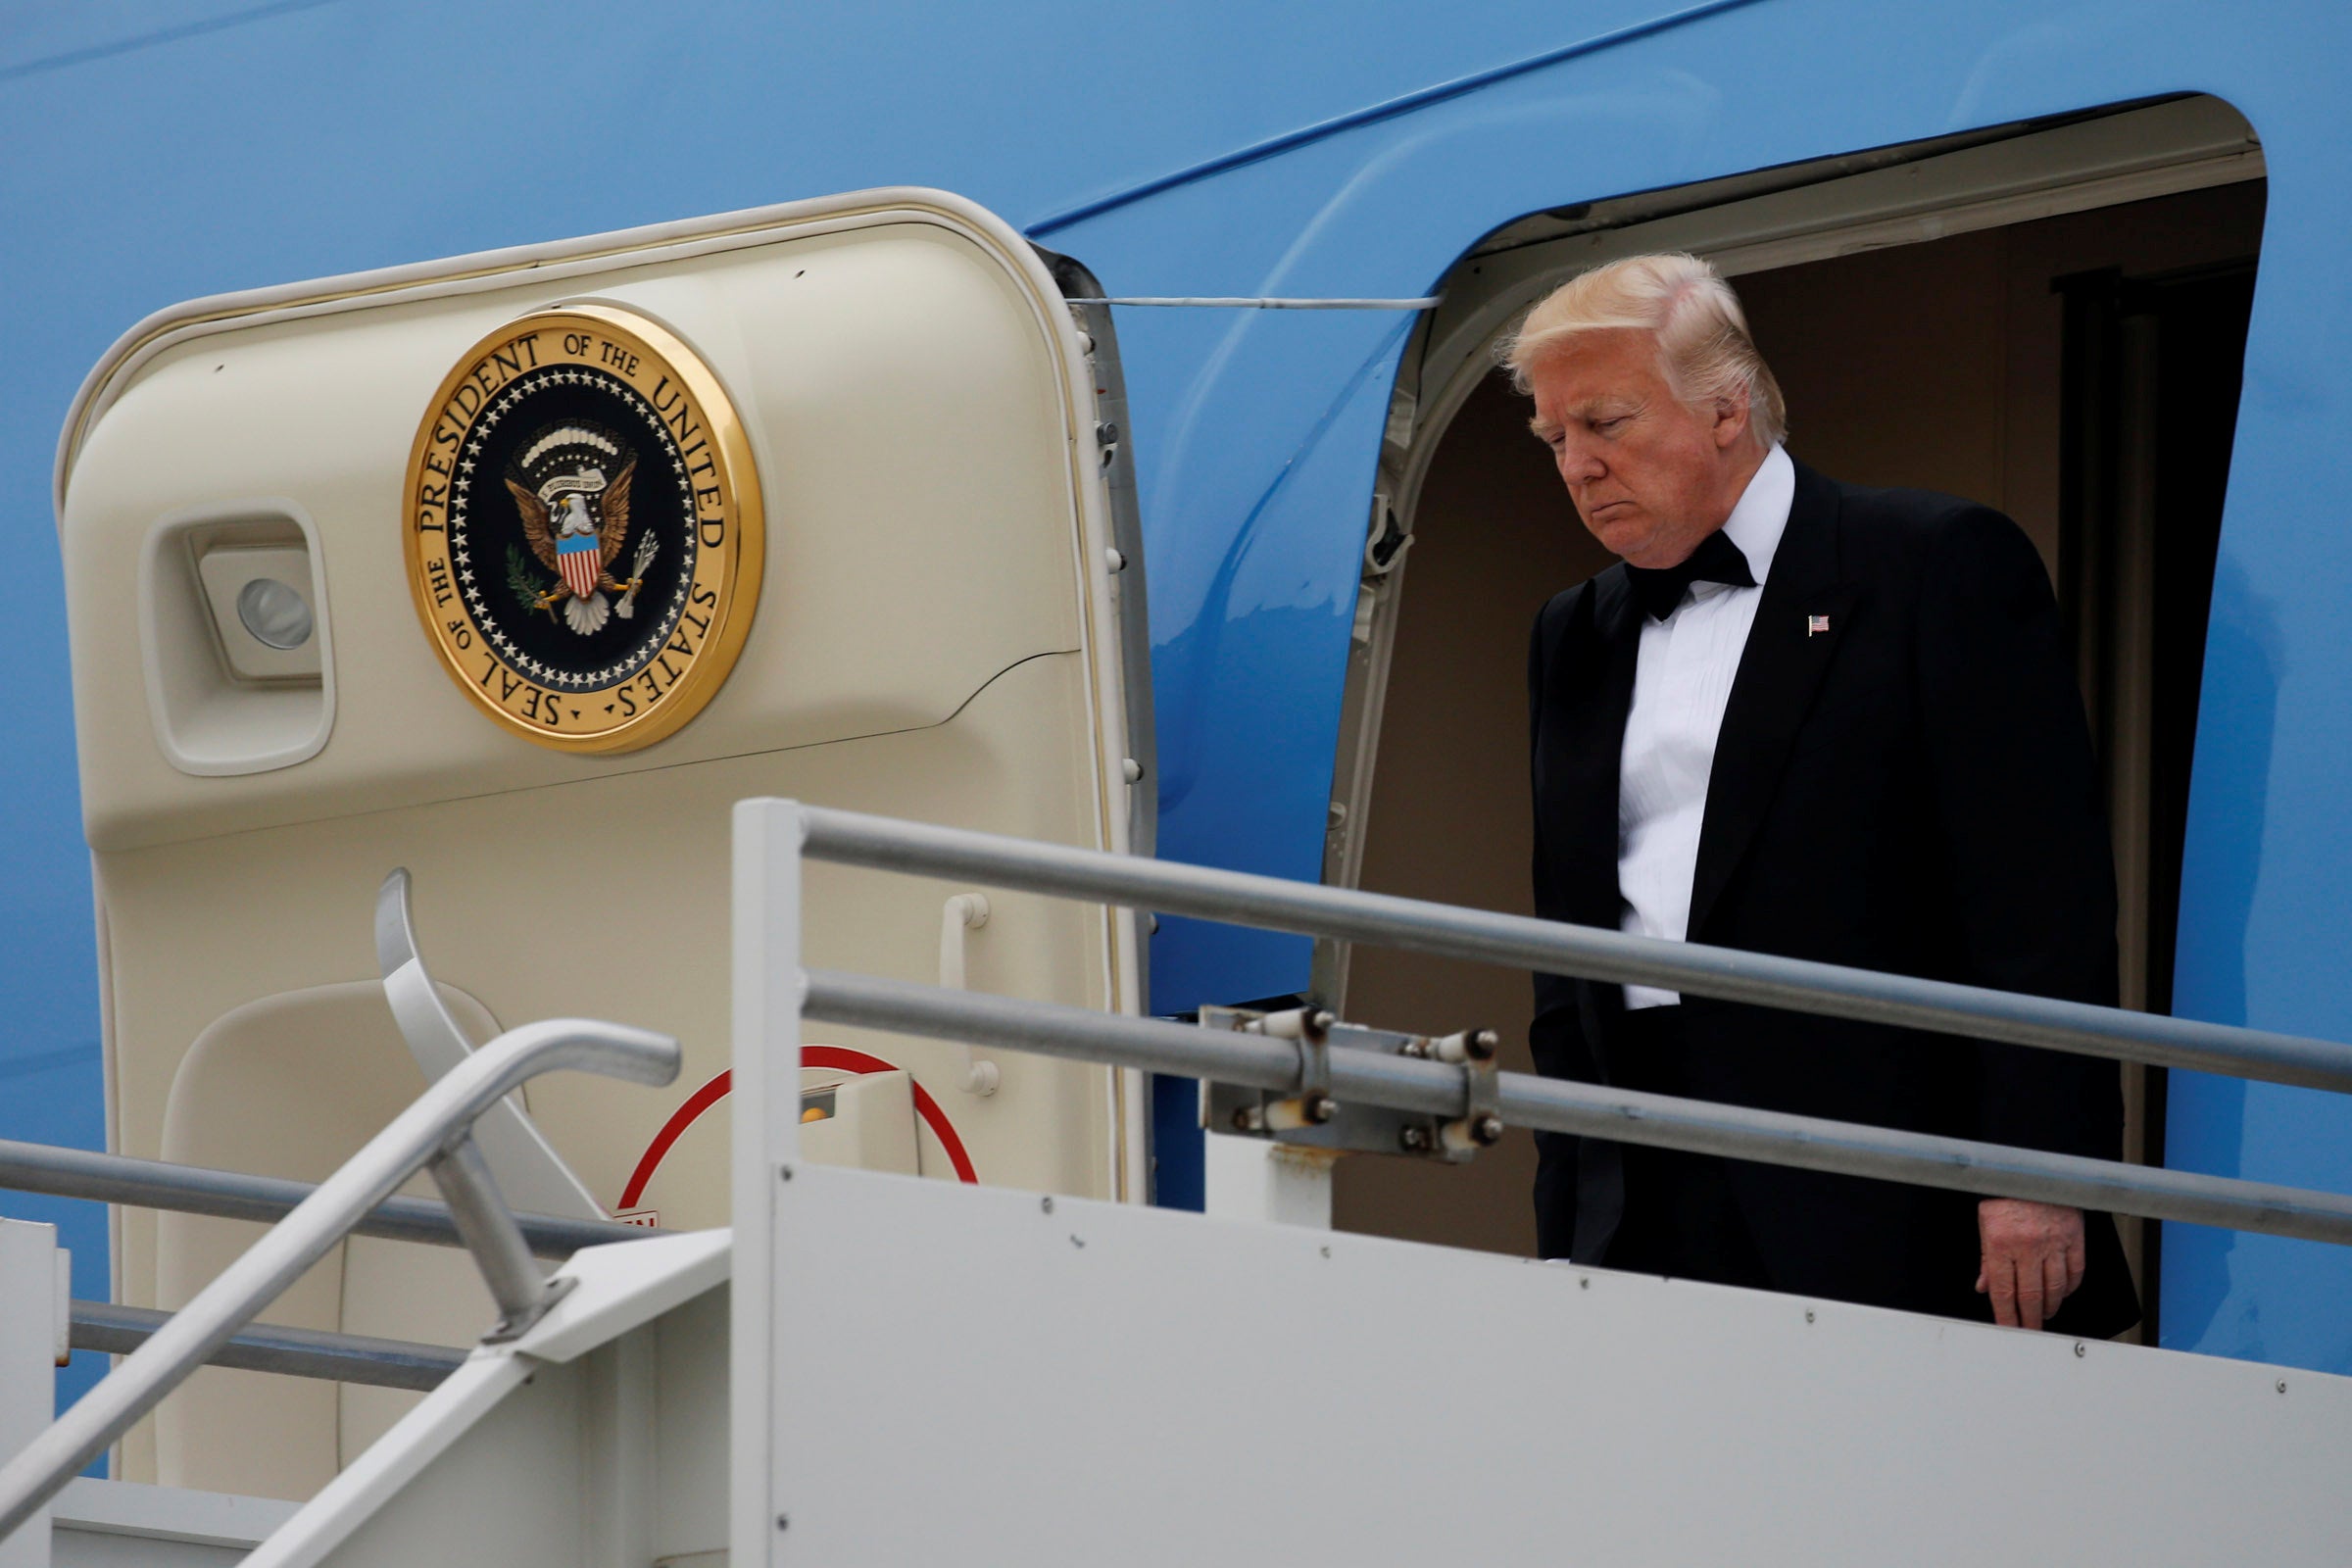 US President Donald Trump arrives aboard Air Force One at JFK International Airport in New York